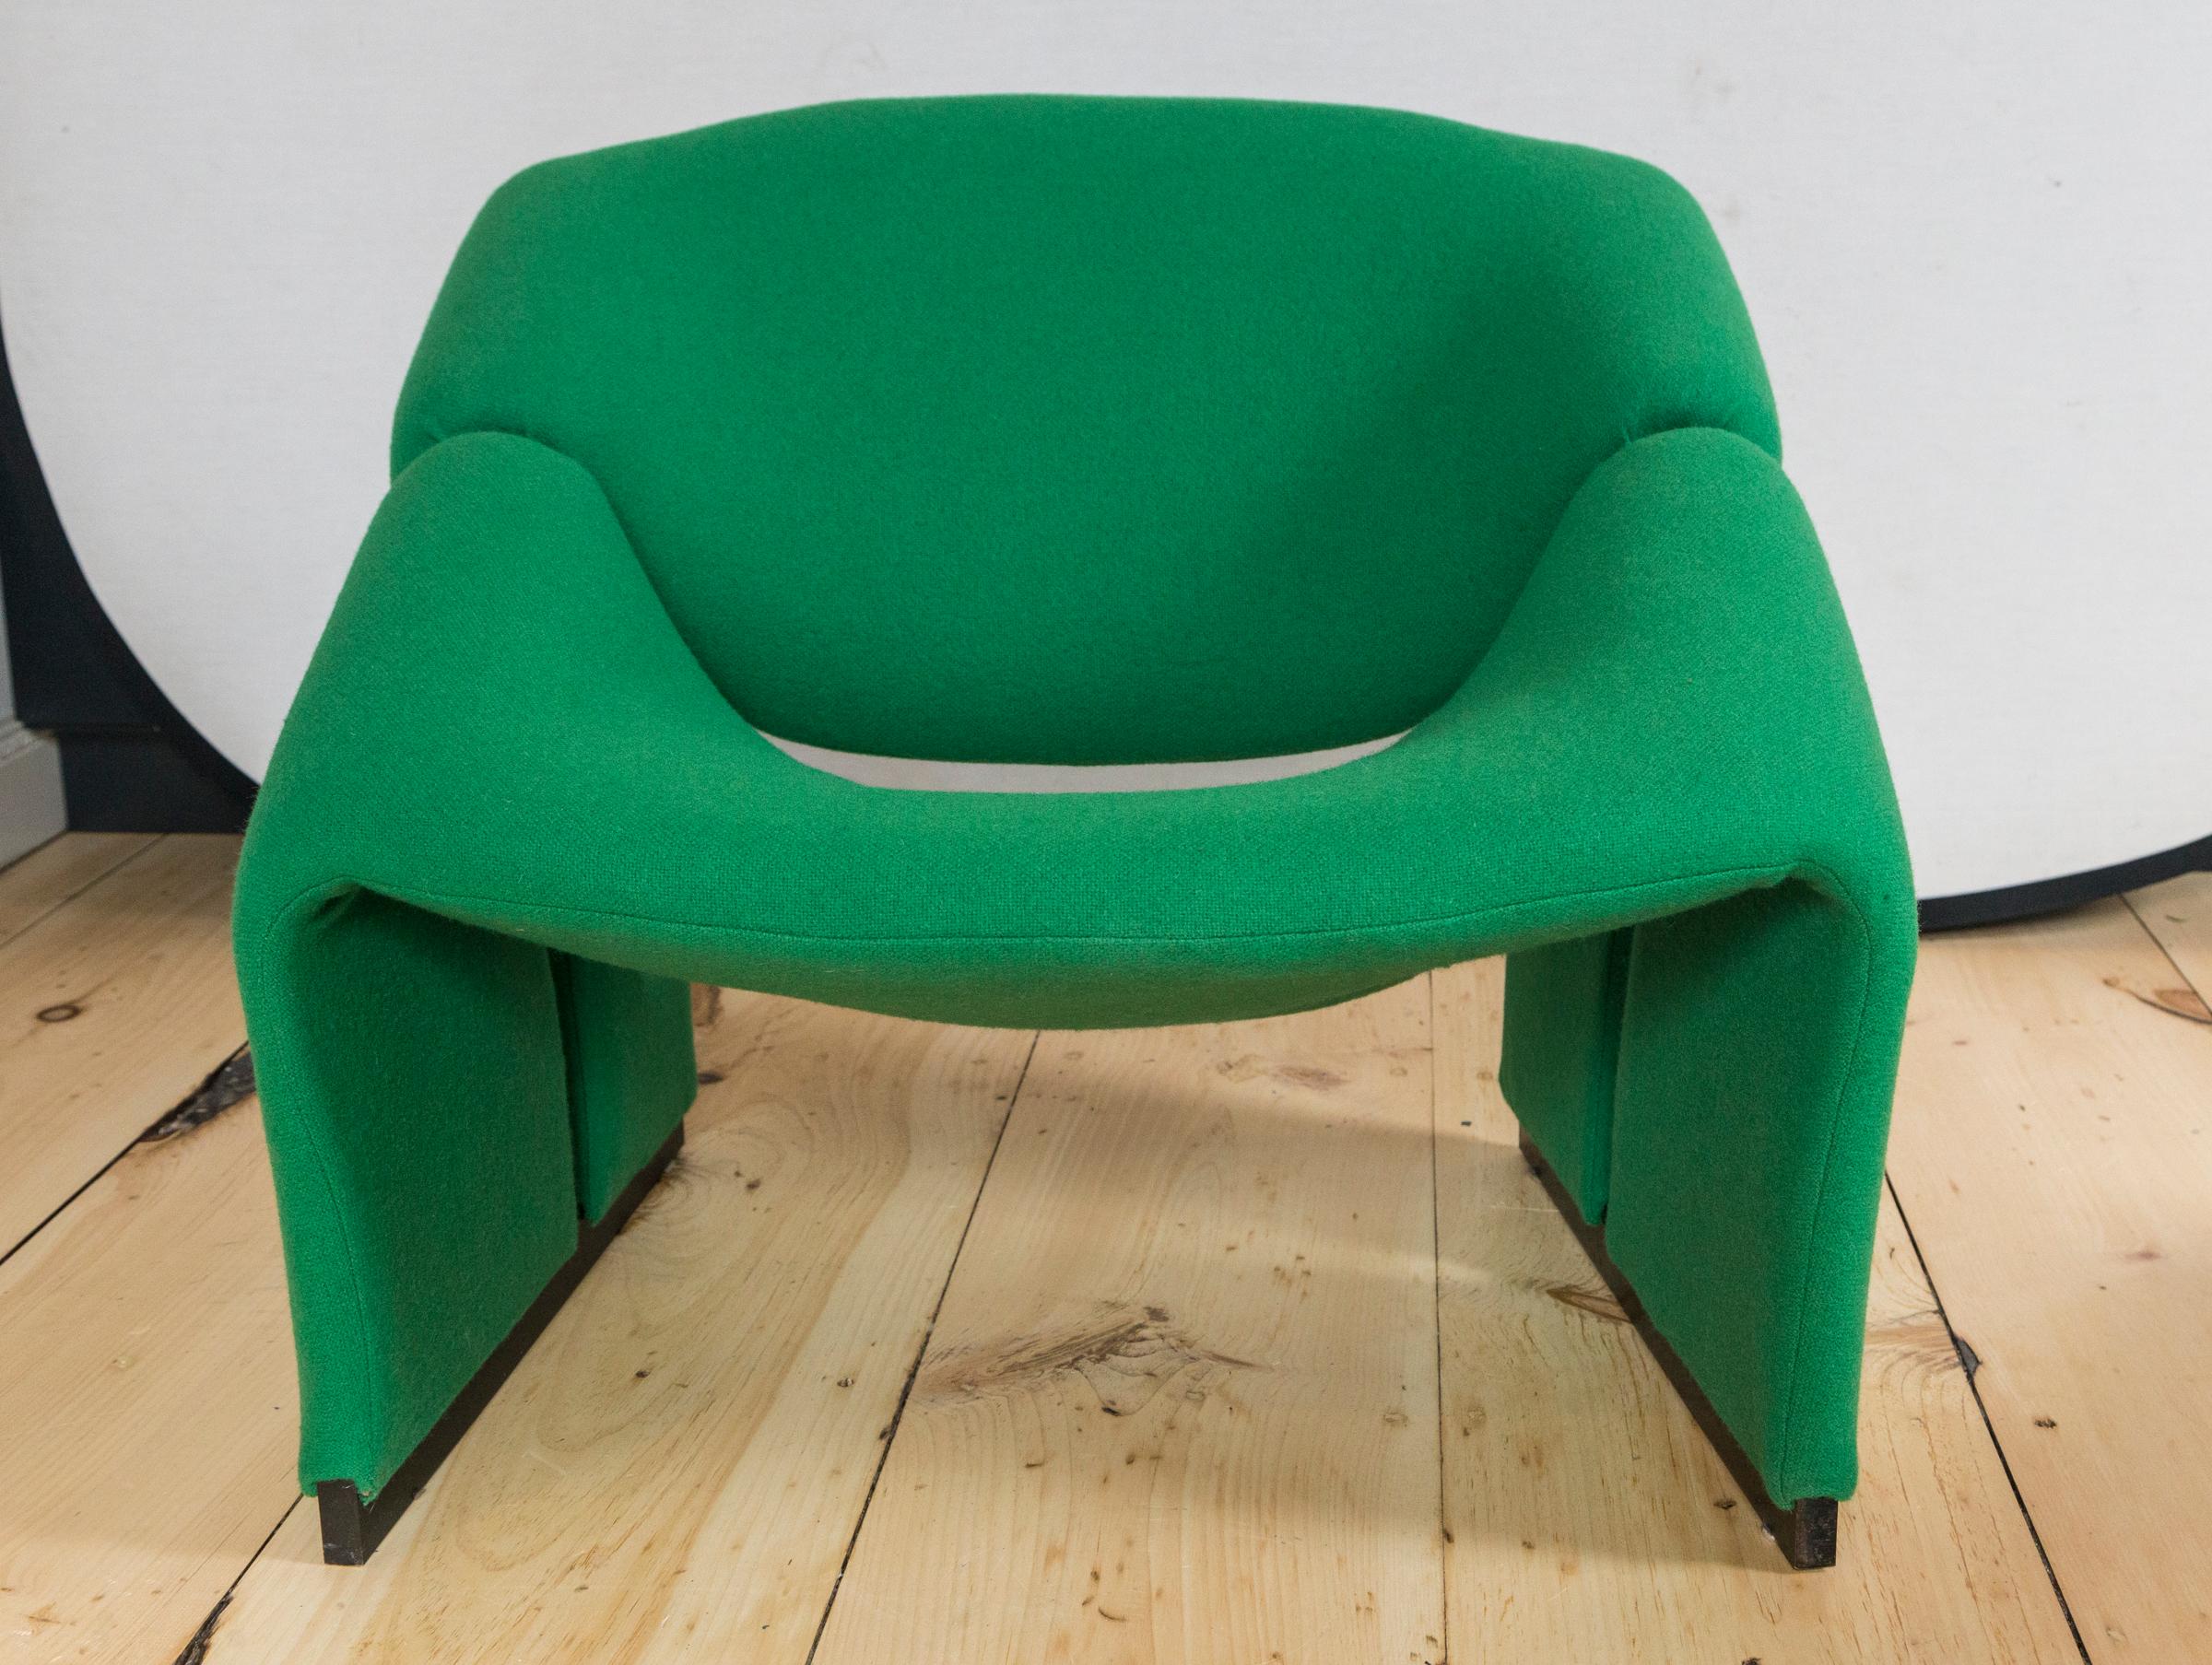 Pierre Paulin first edition green groovy chair F580 for Artifort.
  